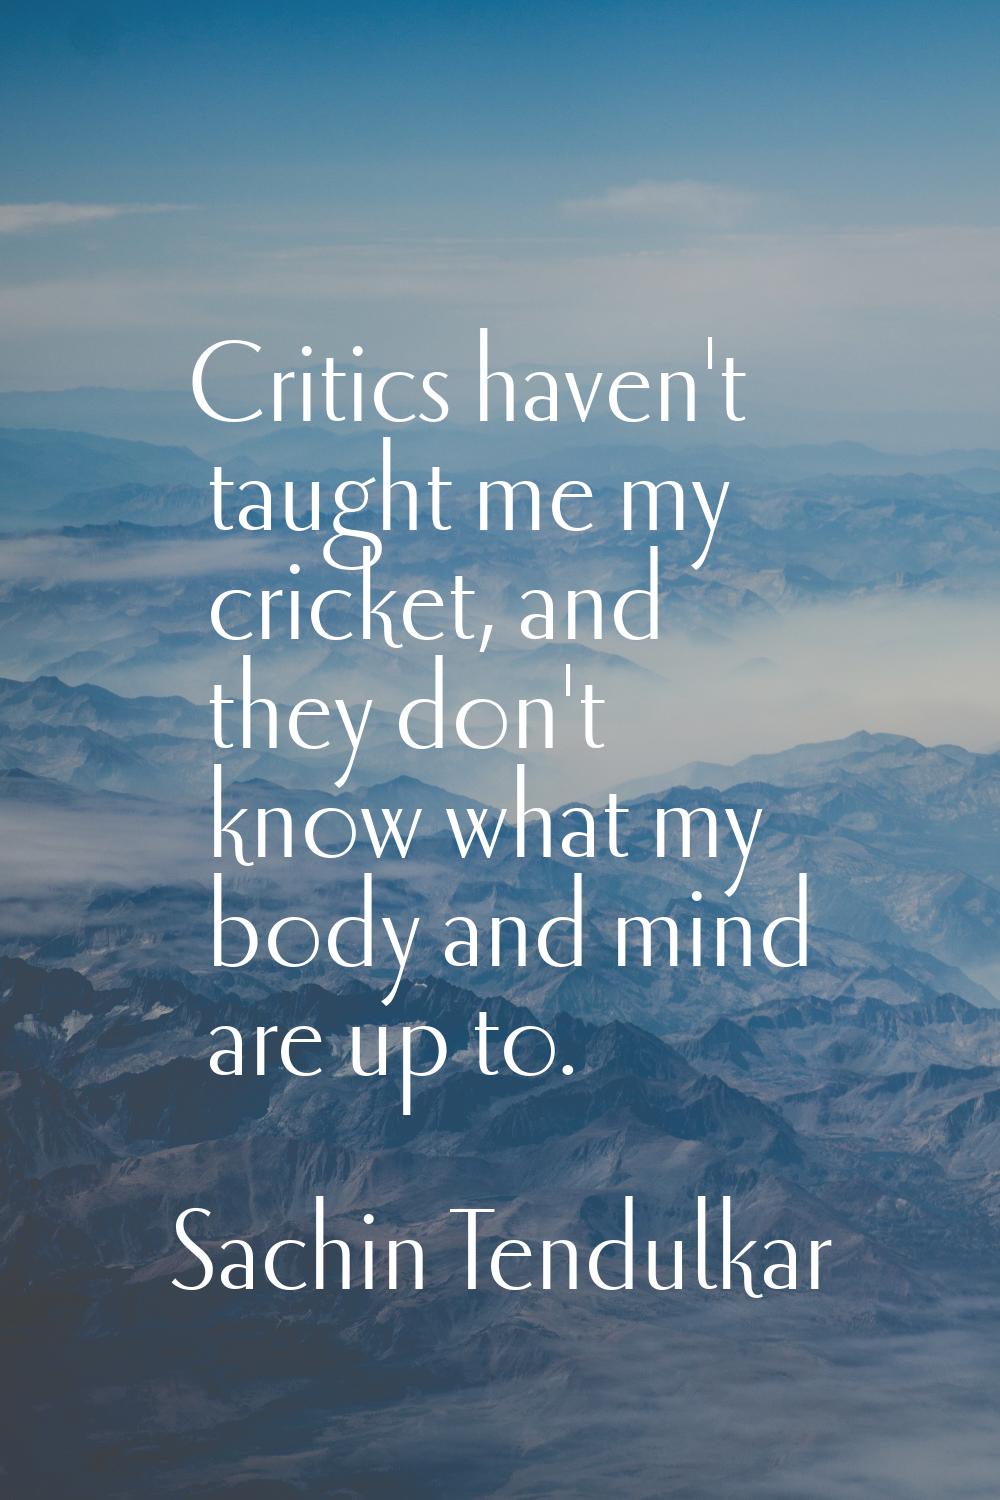 Critics haven't taught me my cricket, and they don't know what my body and mind are up to.